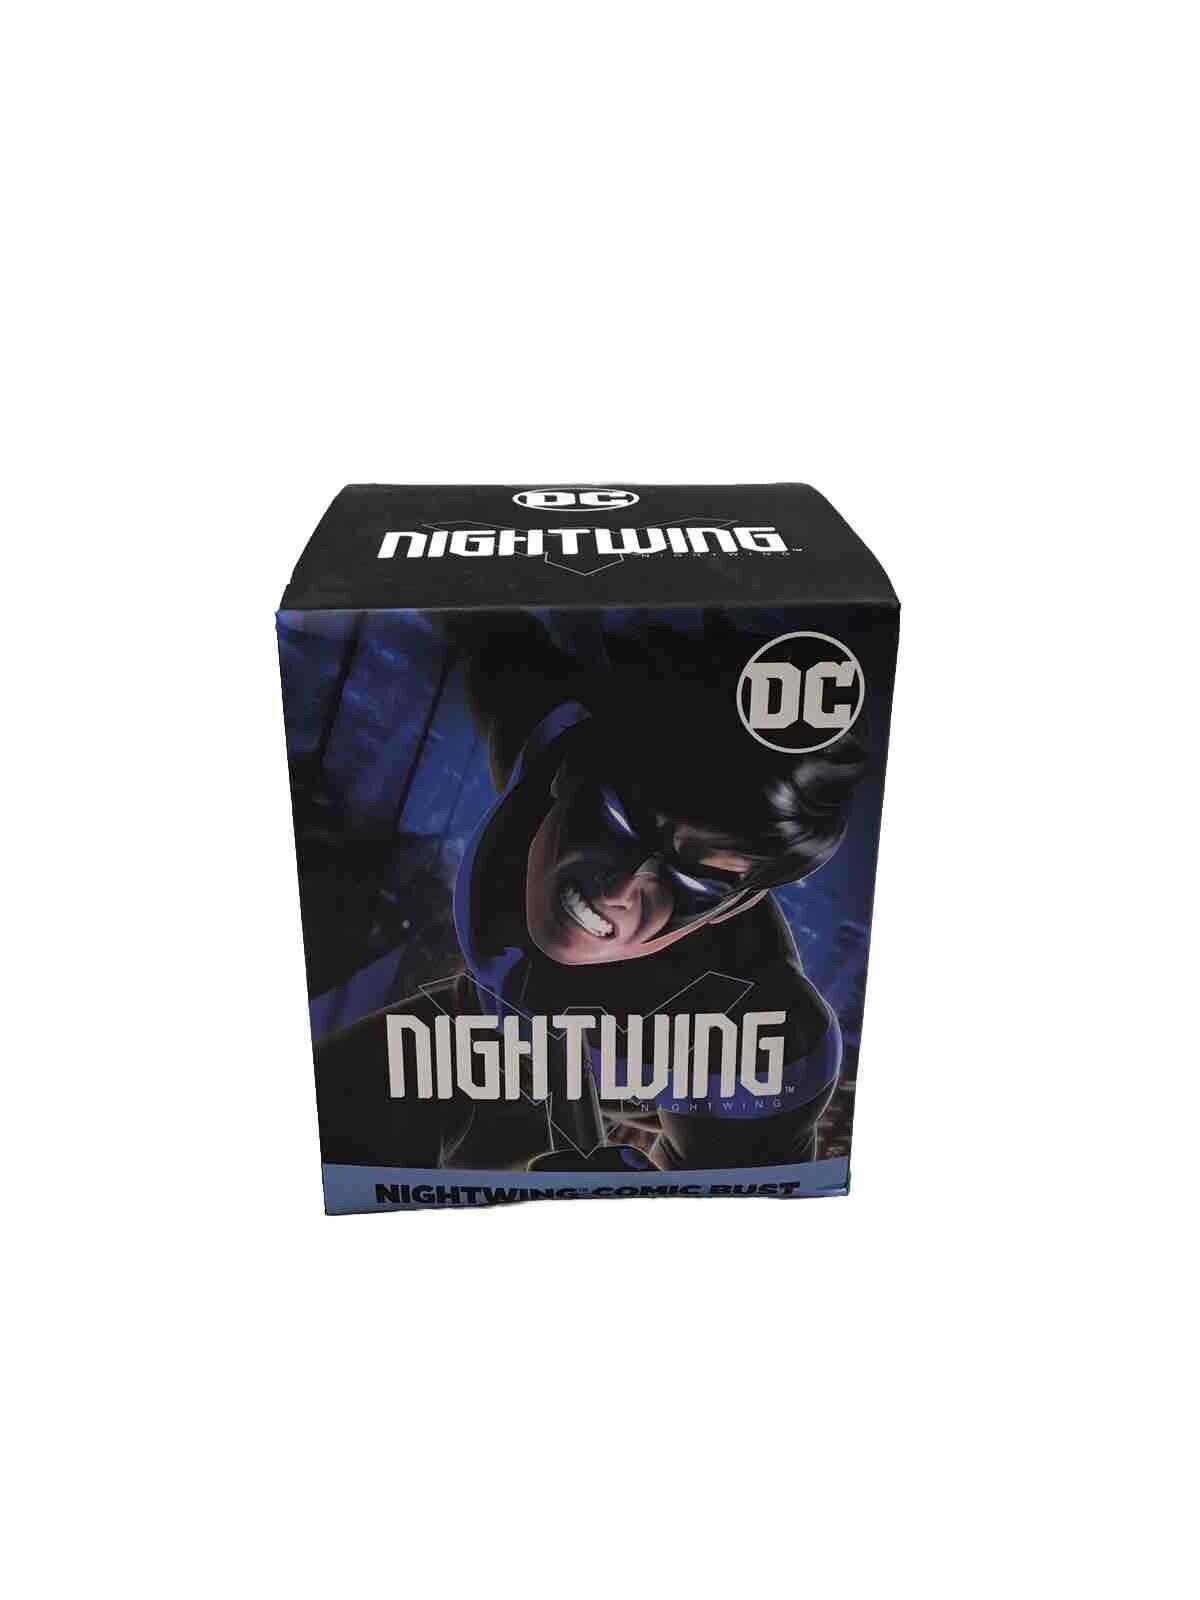 LOOT CRATE DC Comics Super Heroes Nightwing Bust